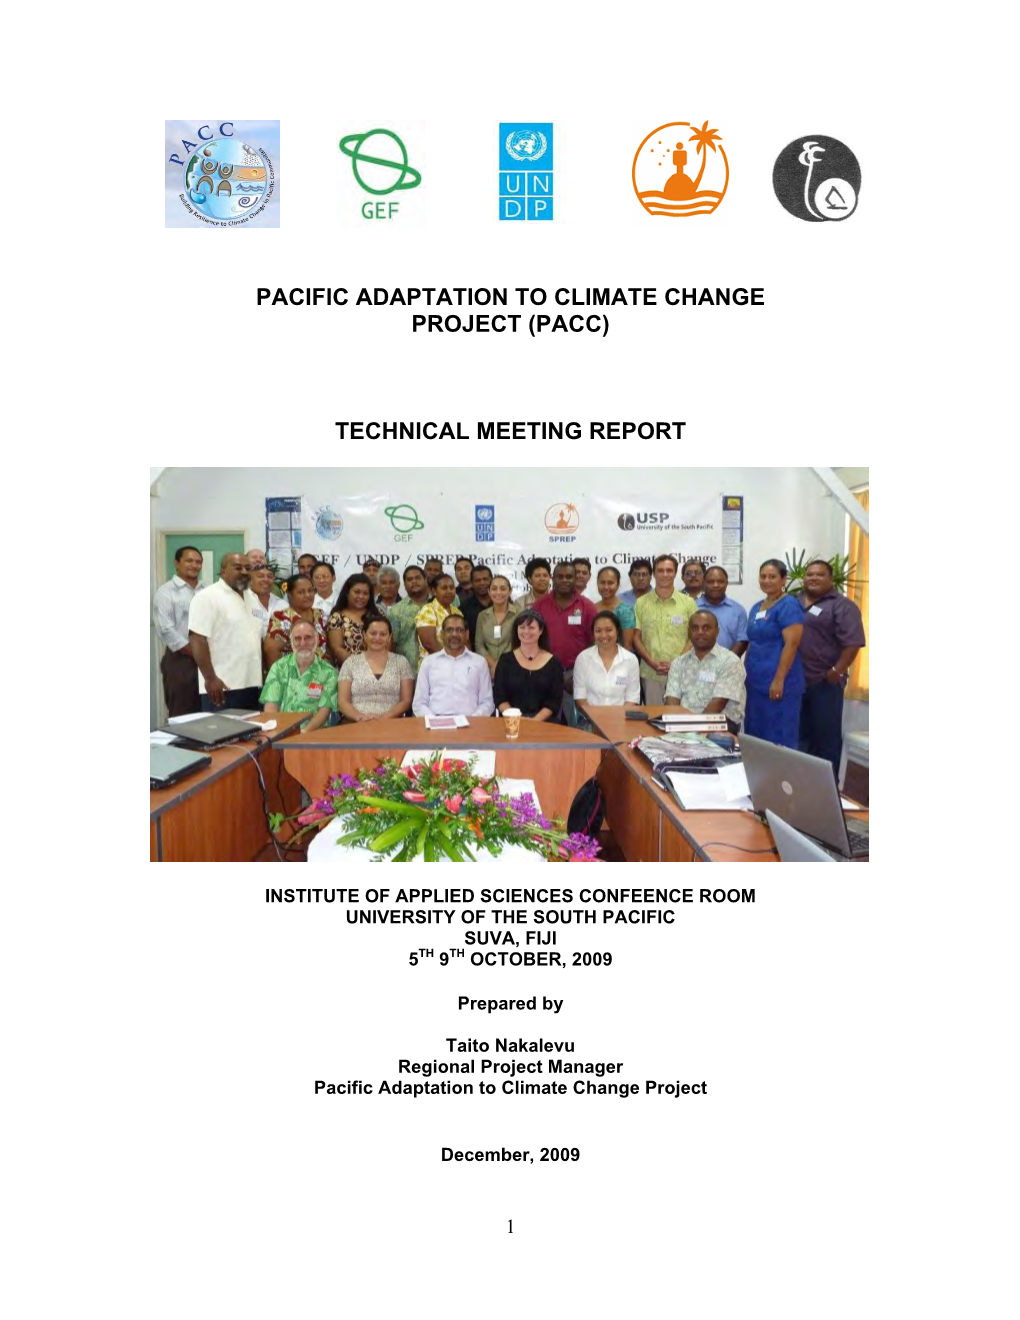 Pacific Adaptation to Climate Change Project (Pacc) Technical Meeting